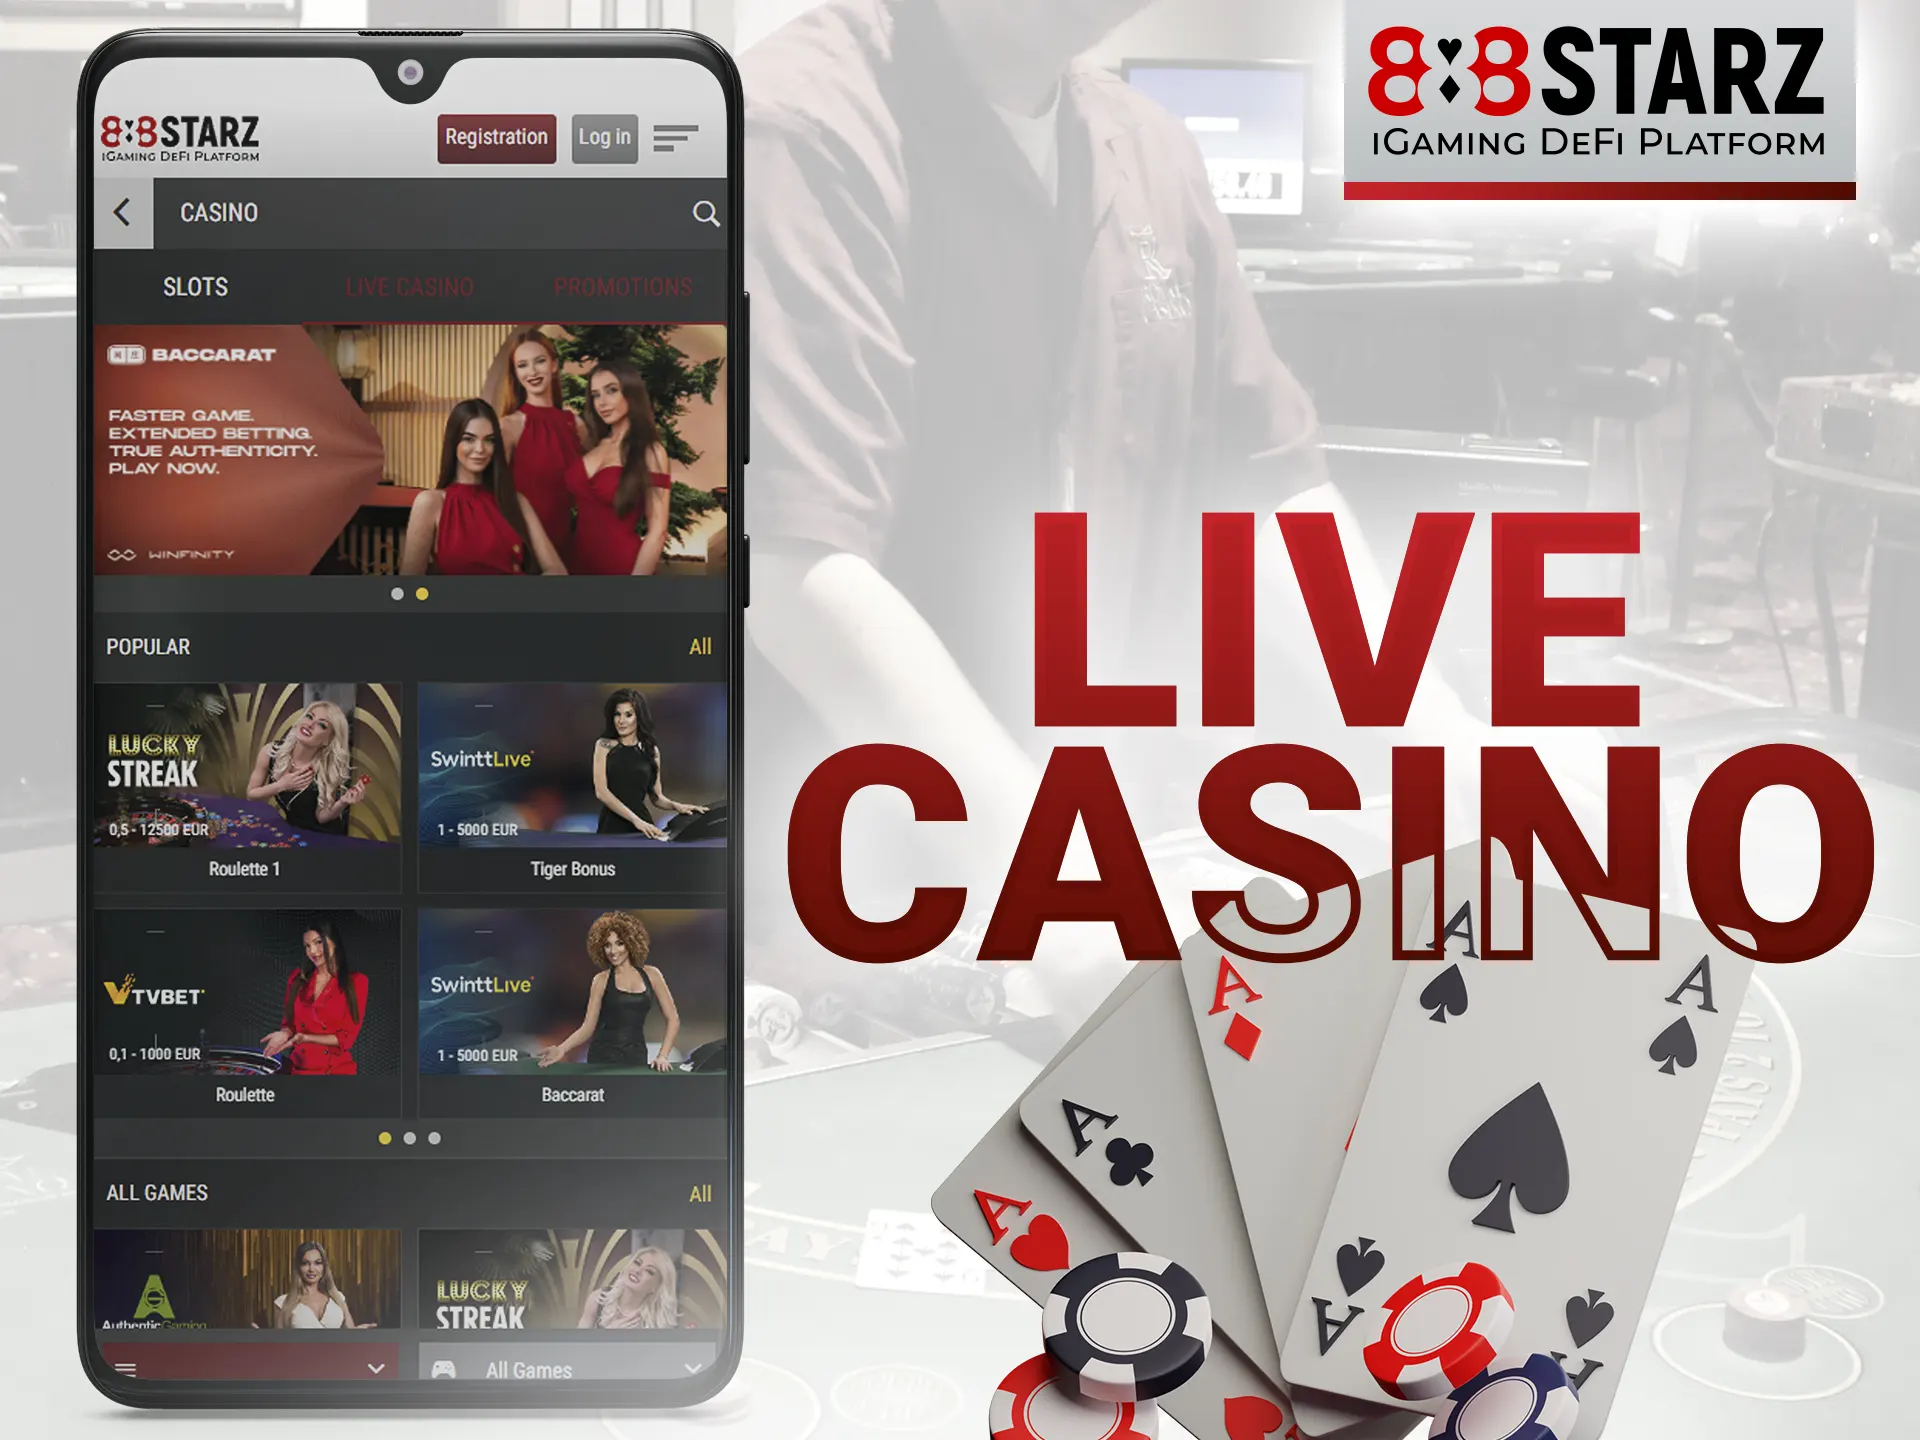 Experience the full range of emotions of live casino gaming.